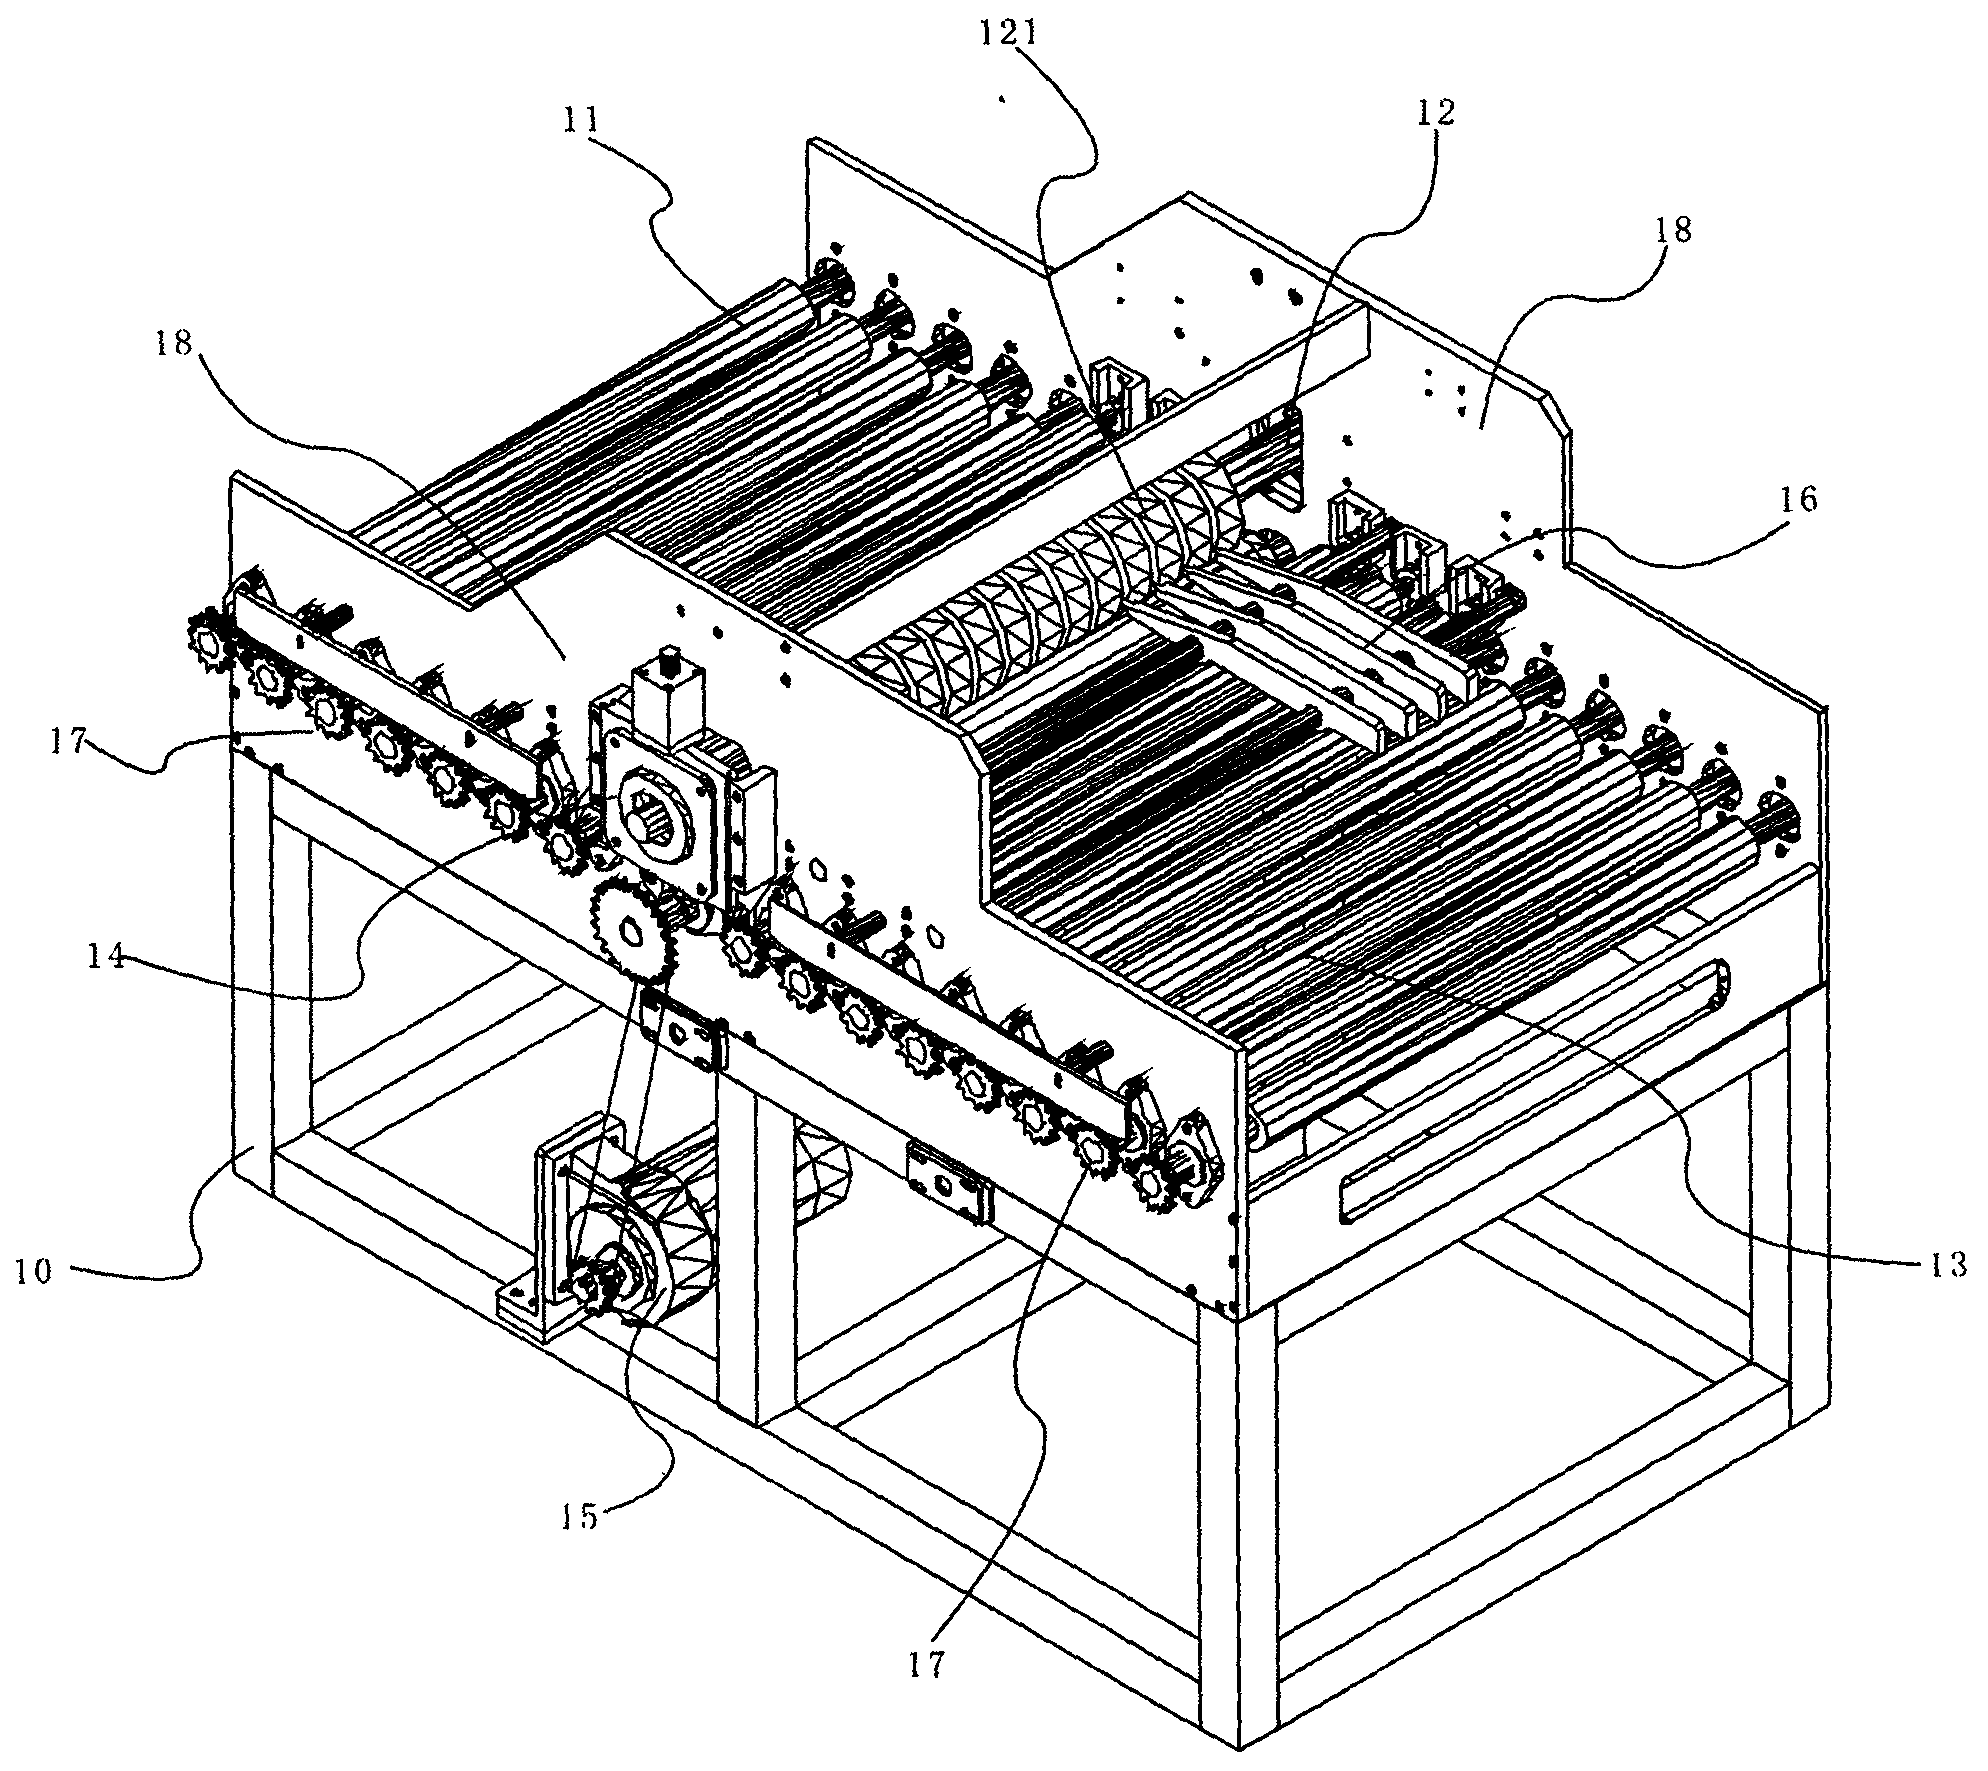 Automatic adhesive tearing-off equipment and method